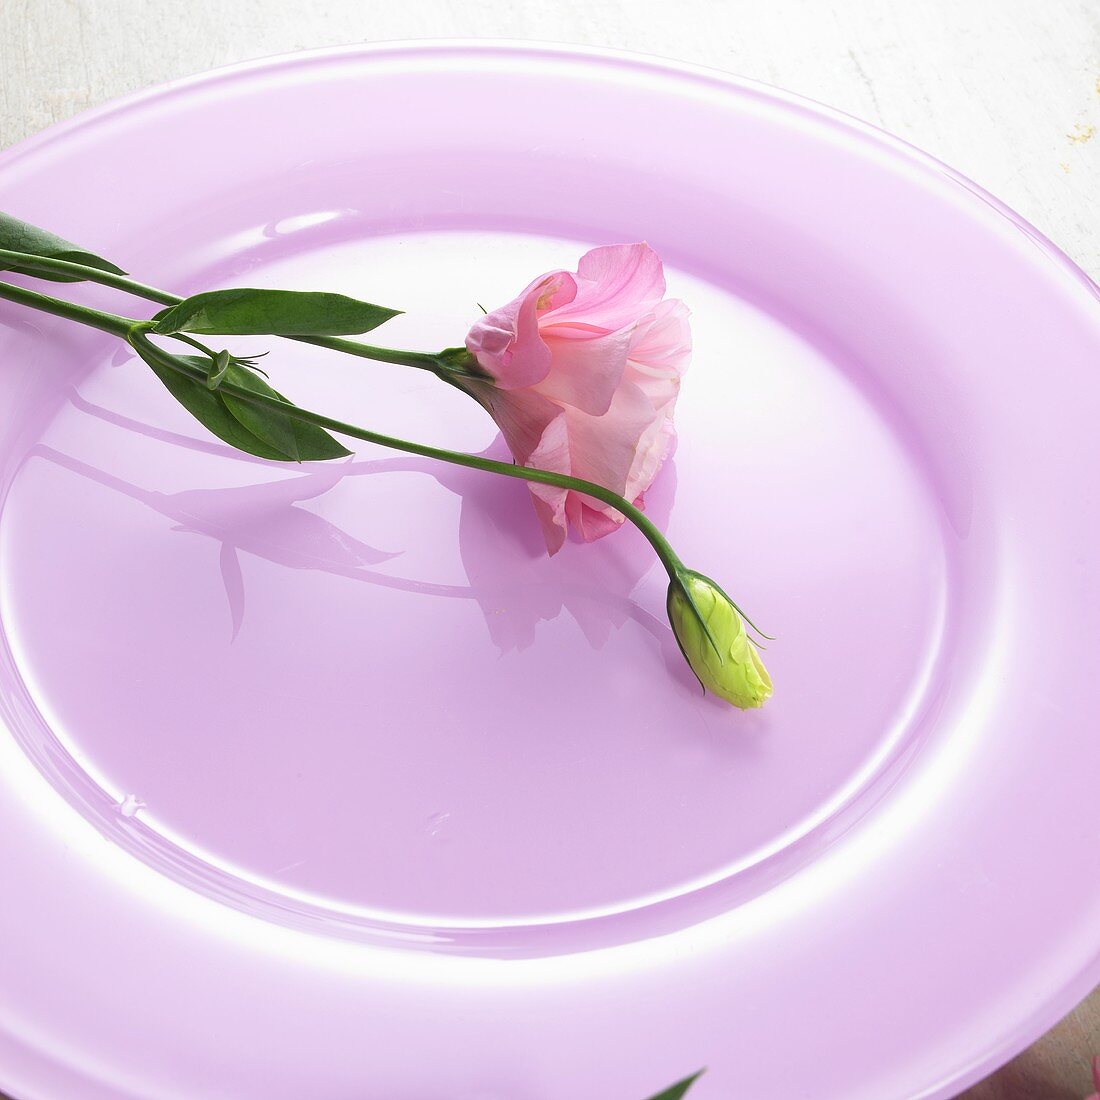 Flower on pink plate